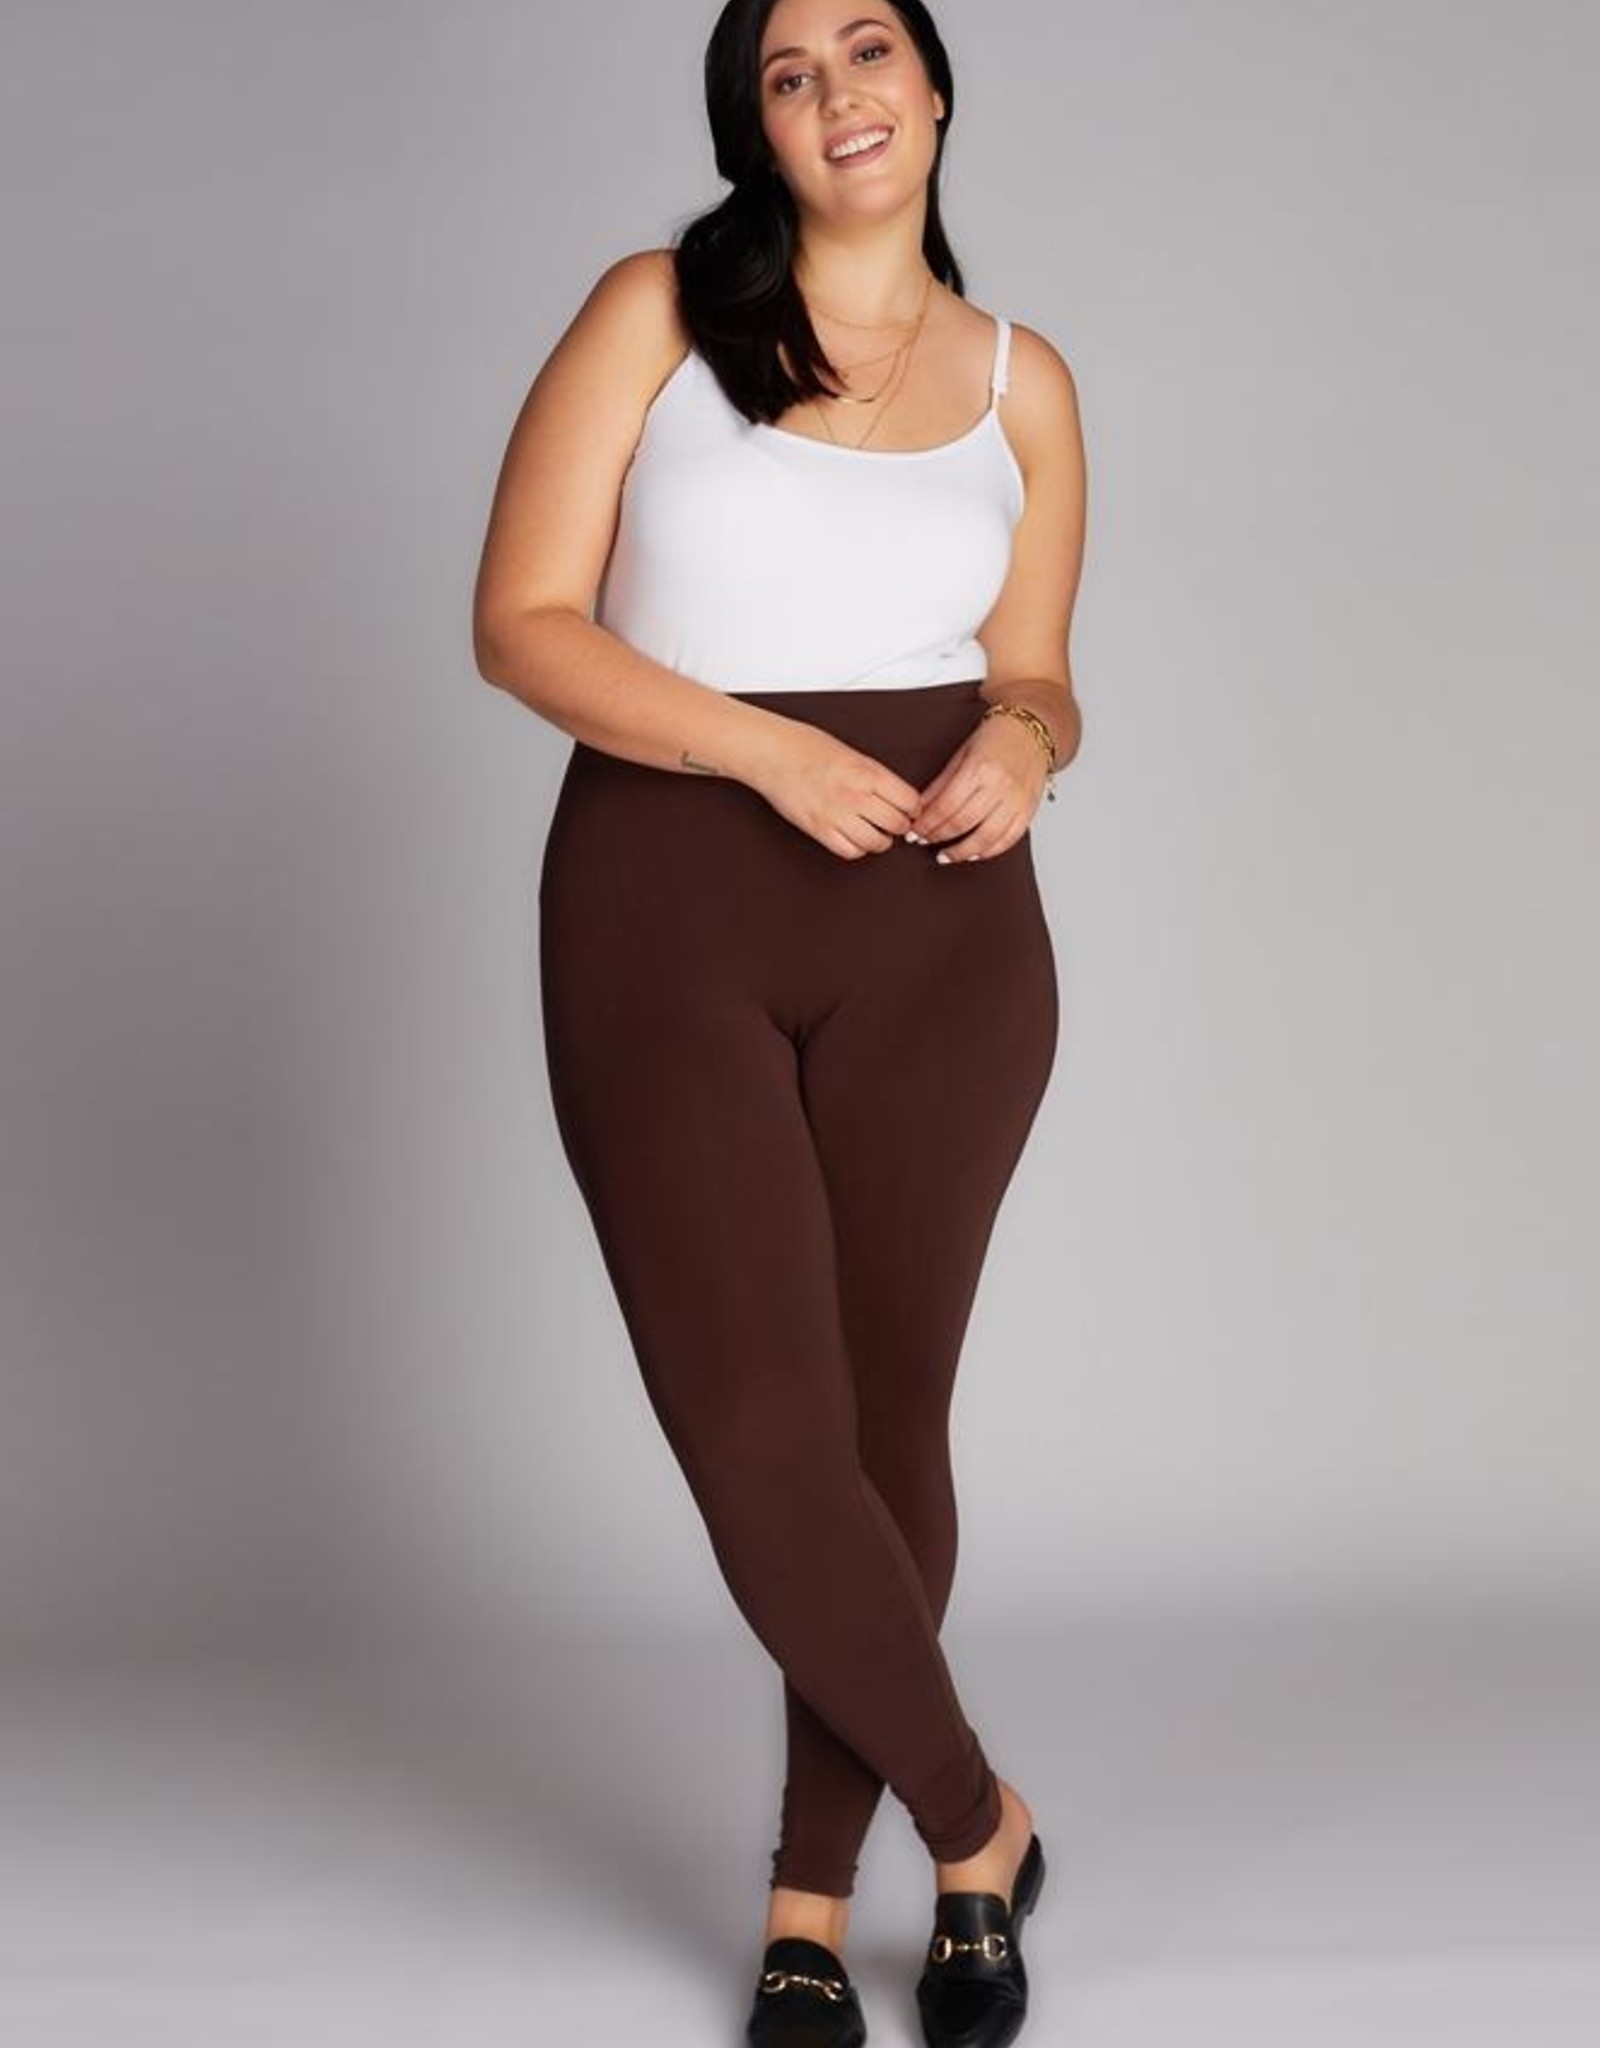 Bamboo Plus Size Legging 3/4 Length - The Art of Home